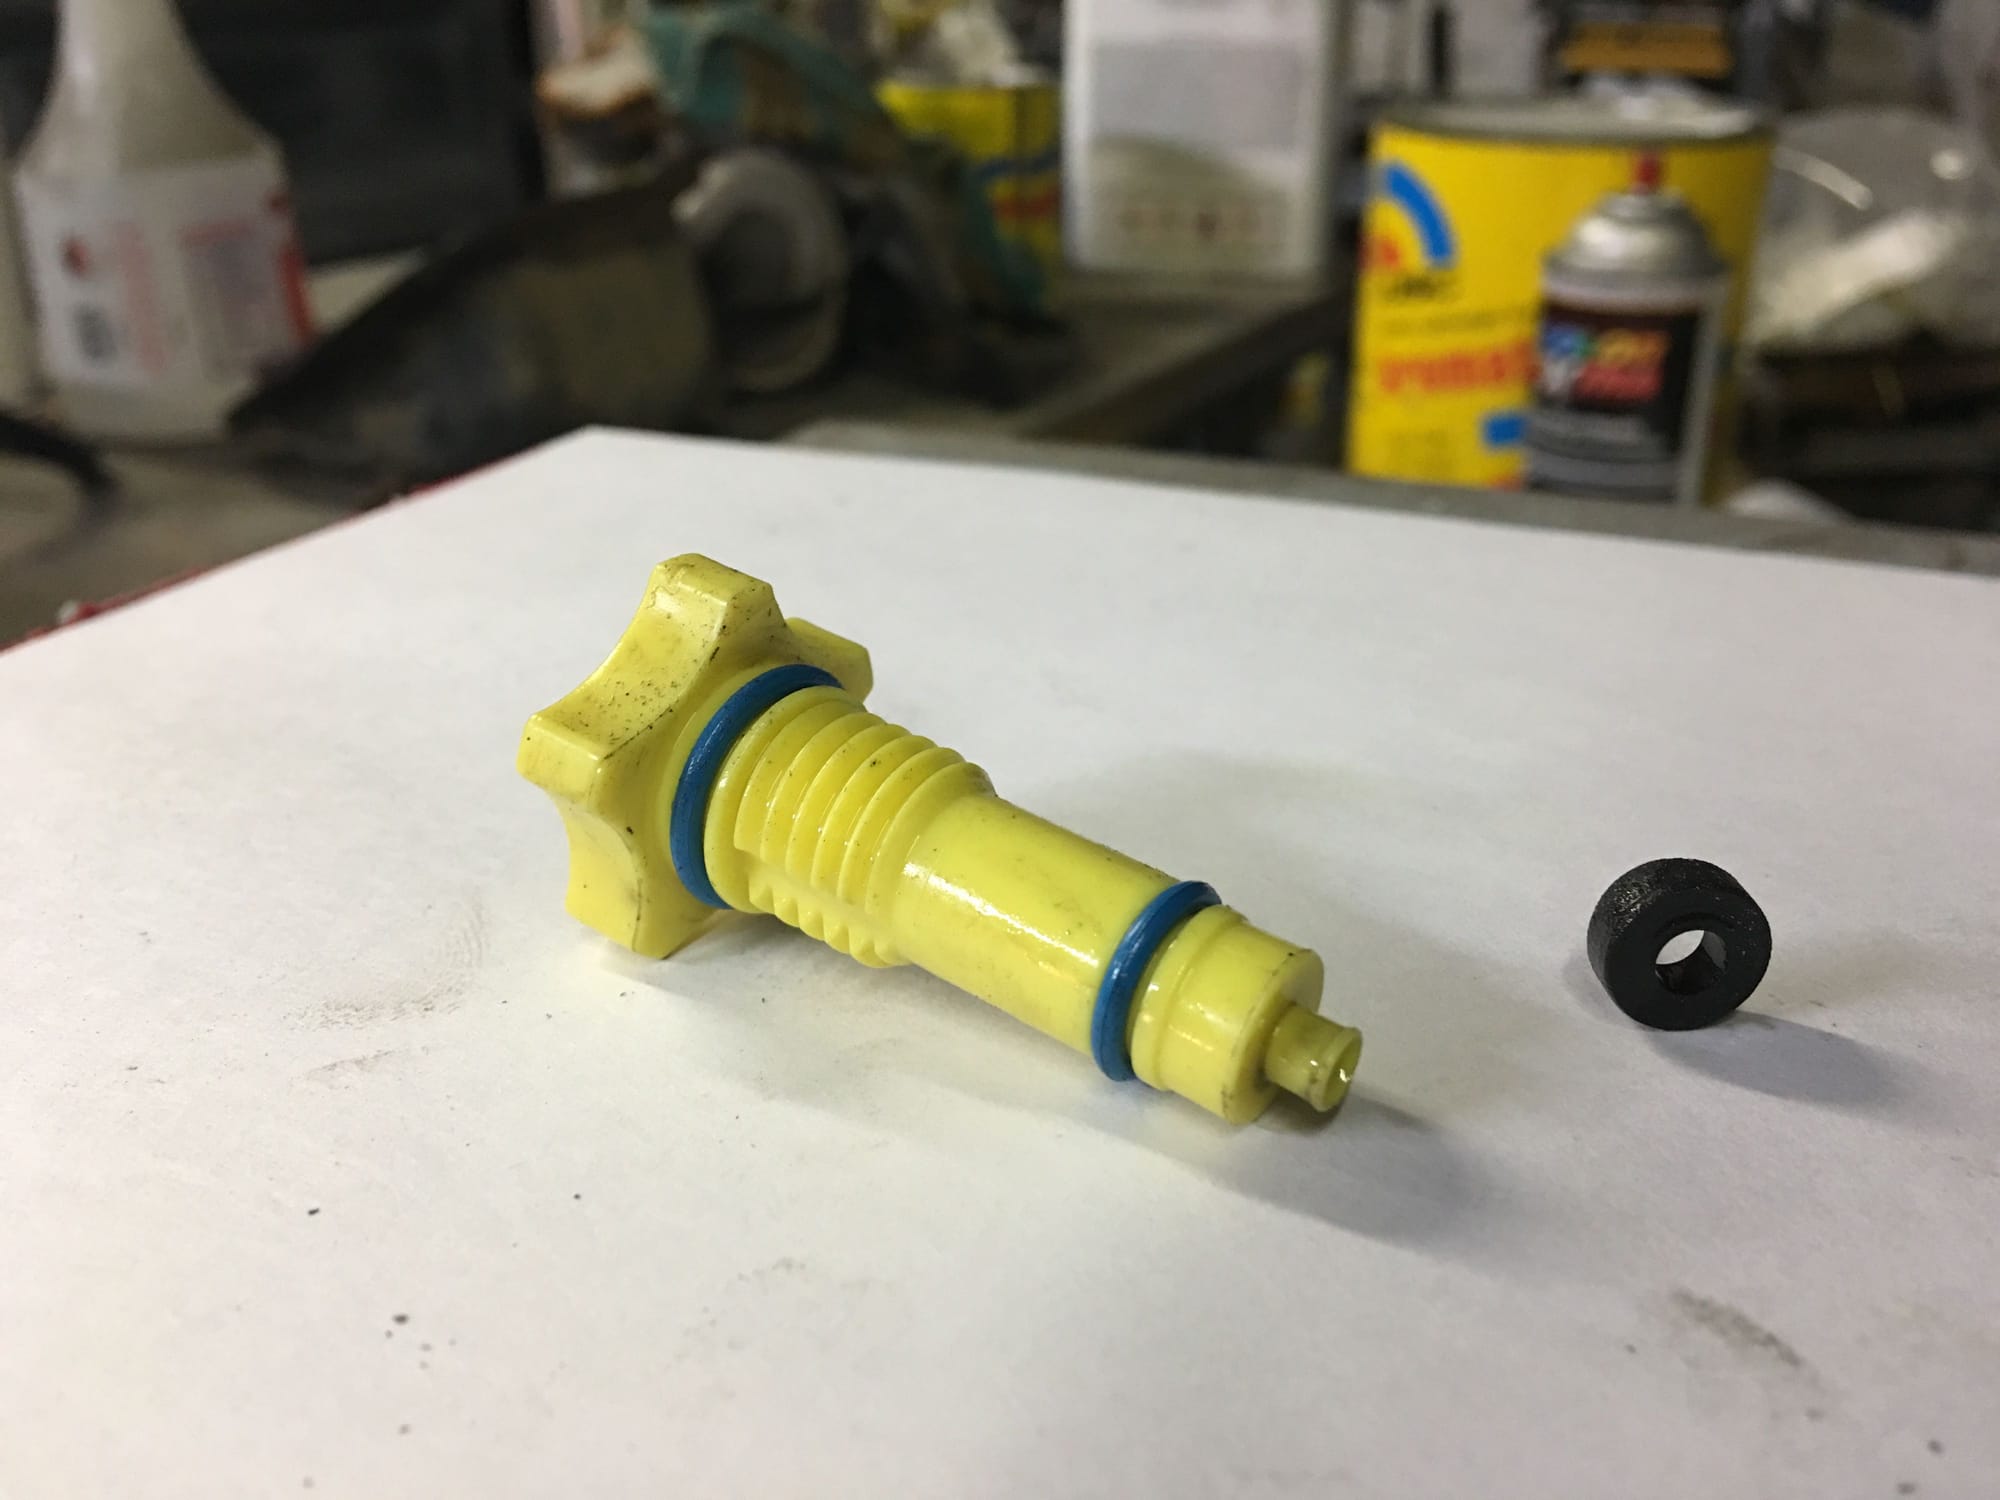 2015 Diesel fuel filter change problems - Ford Truck Enthusiasts Forums 6.7 Powerstroke Wont Start After Fuel Filter Change